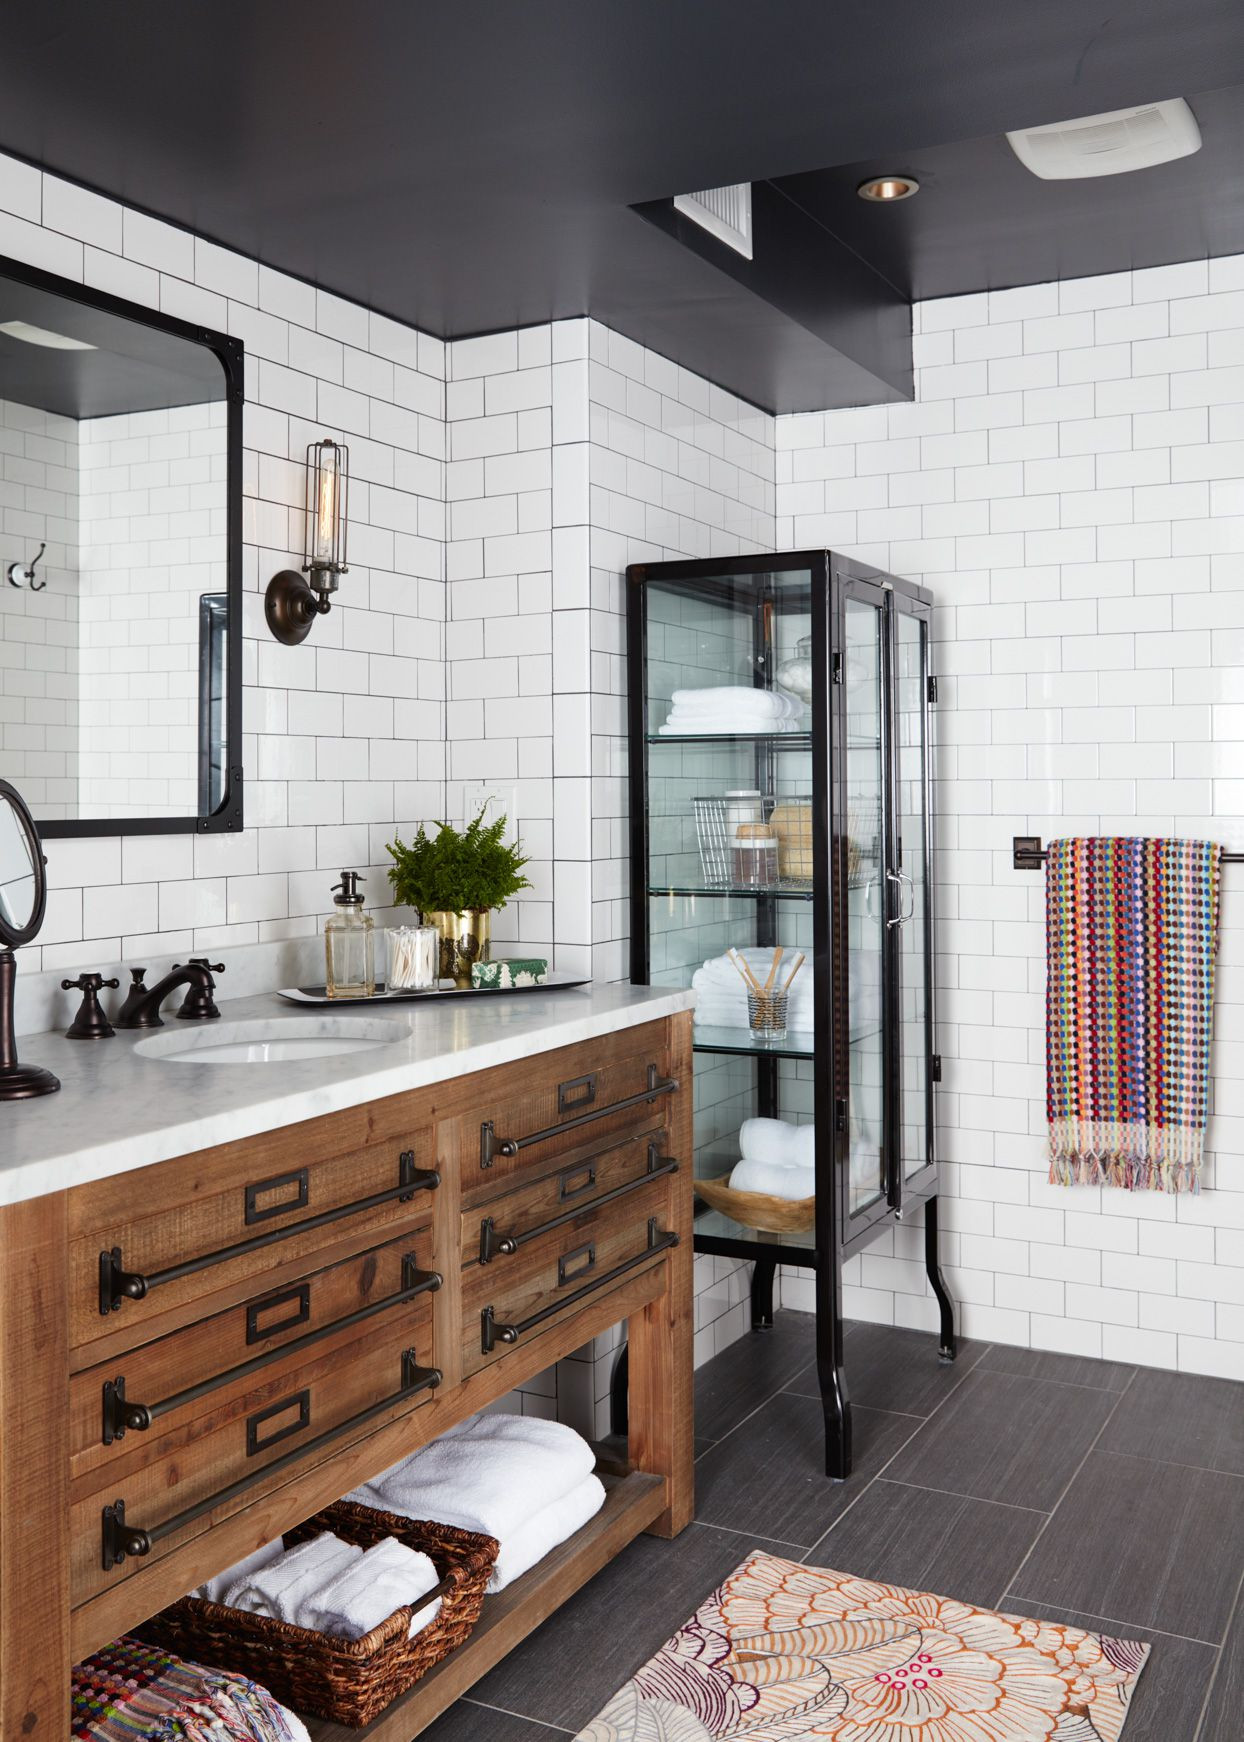 The Top  Bathroom Trends, According to Designers